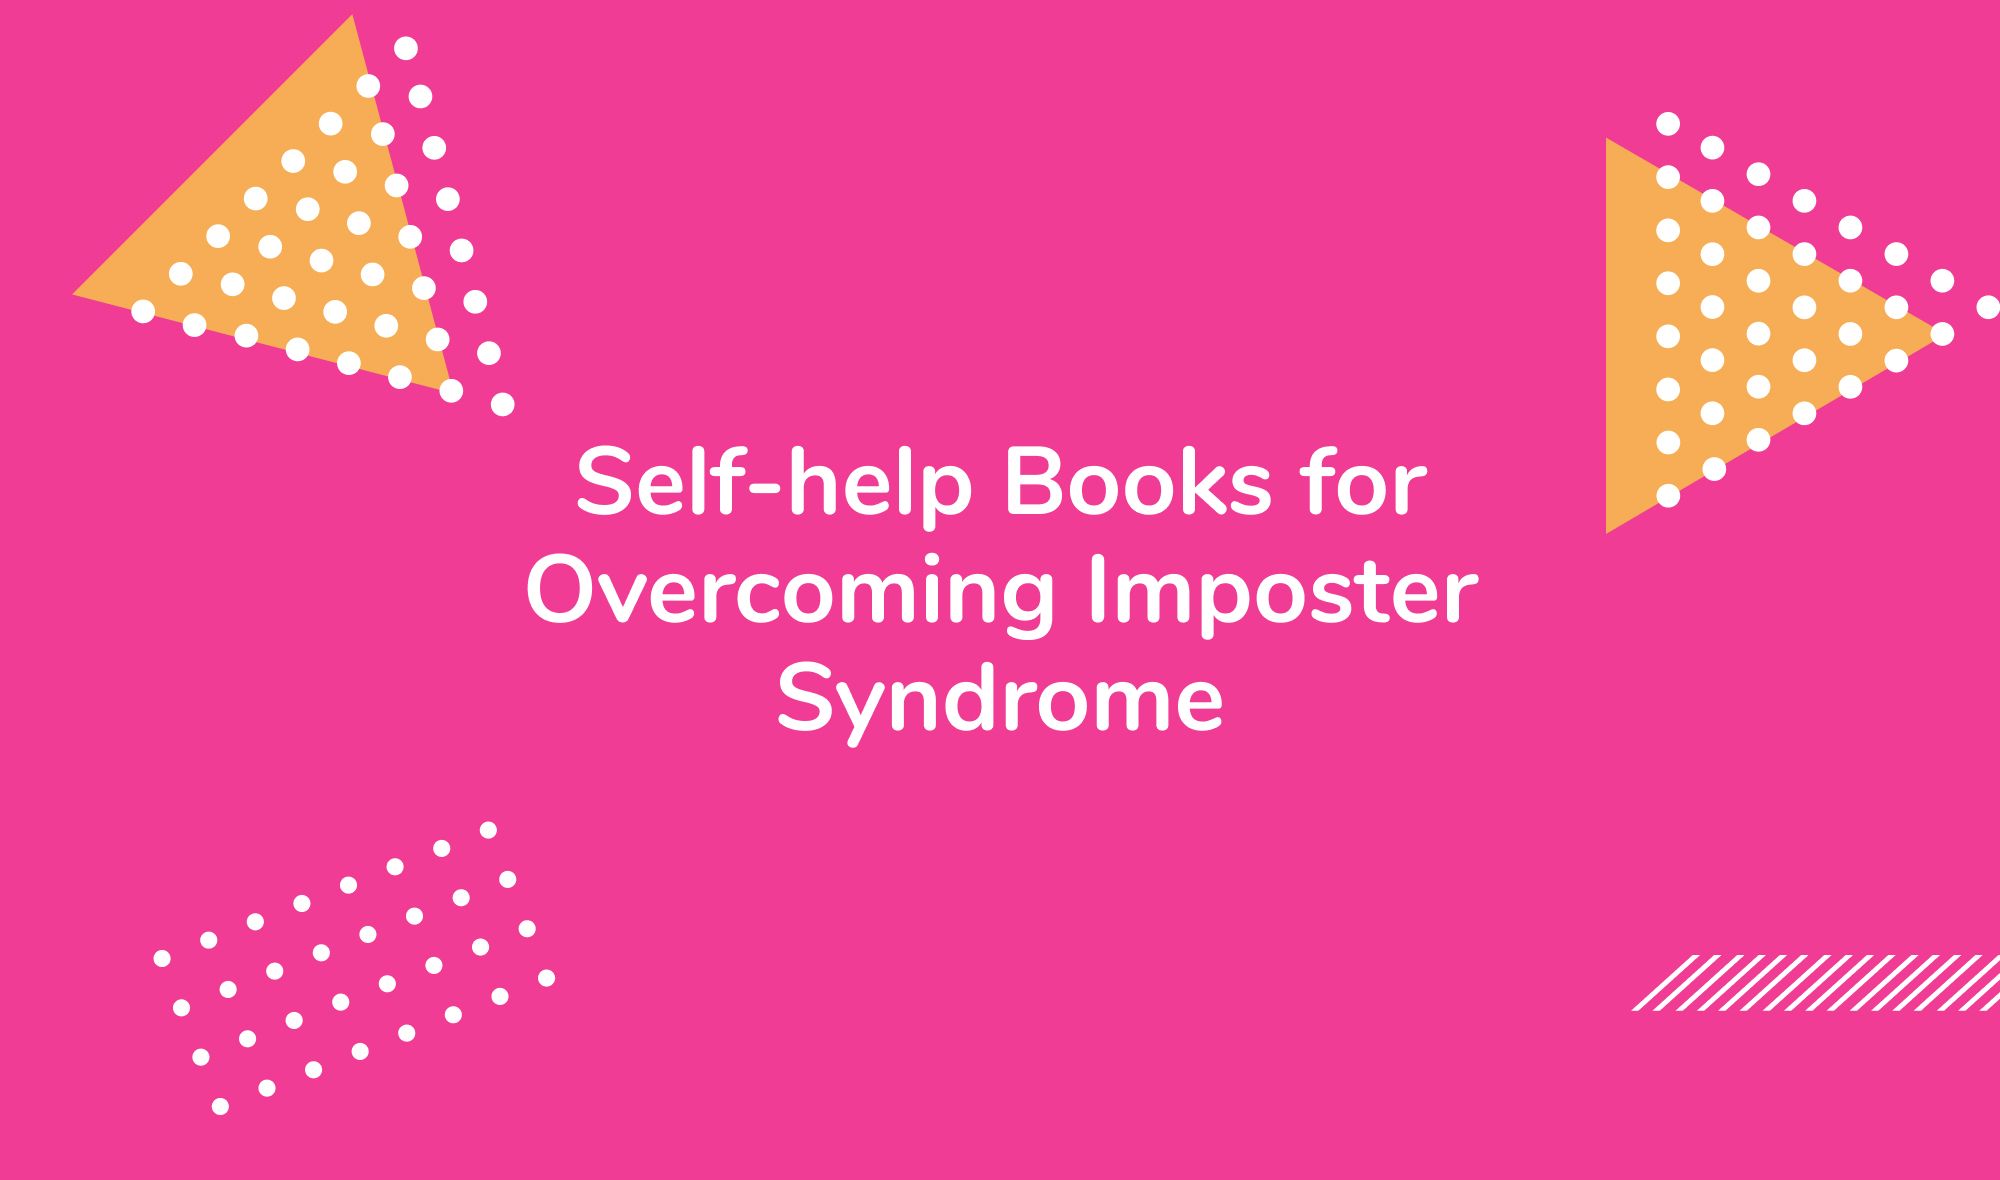 Self-help Books for Overcoming Imposter Syndrome